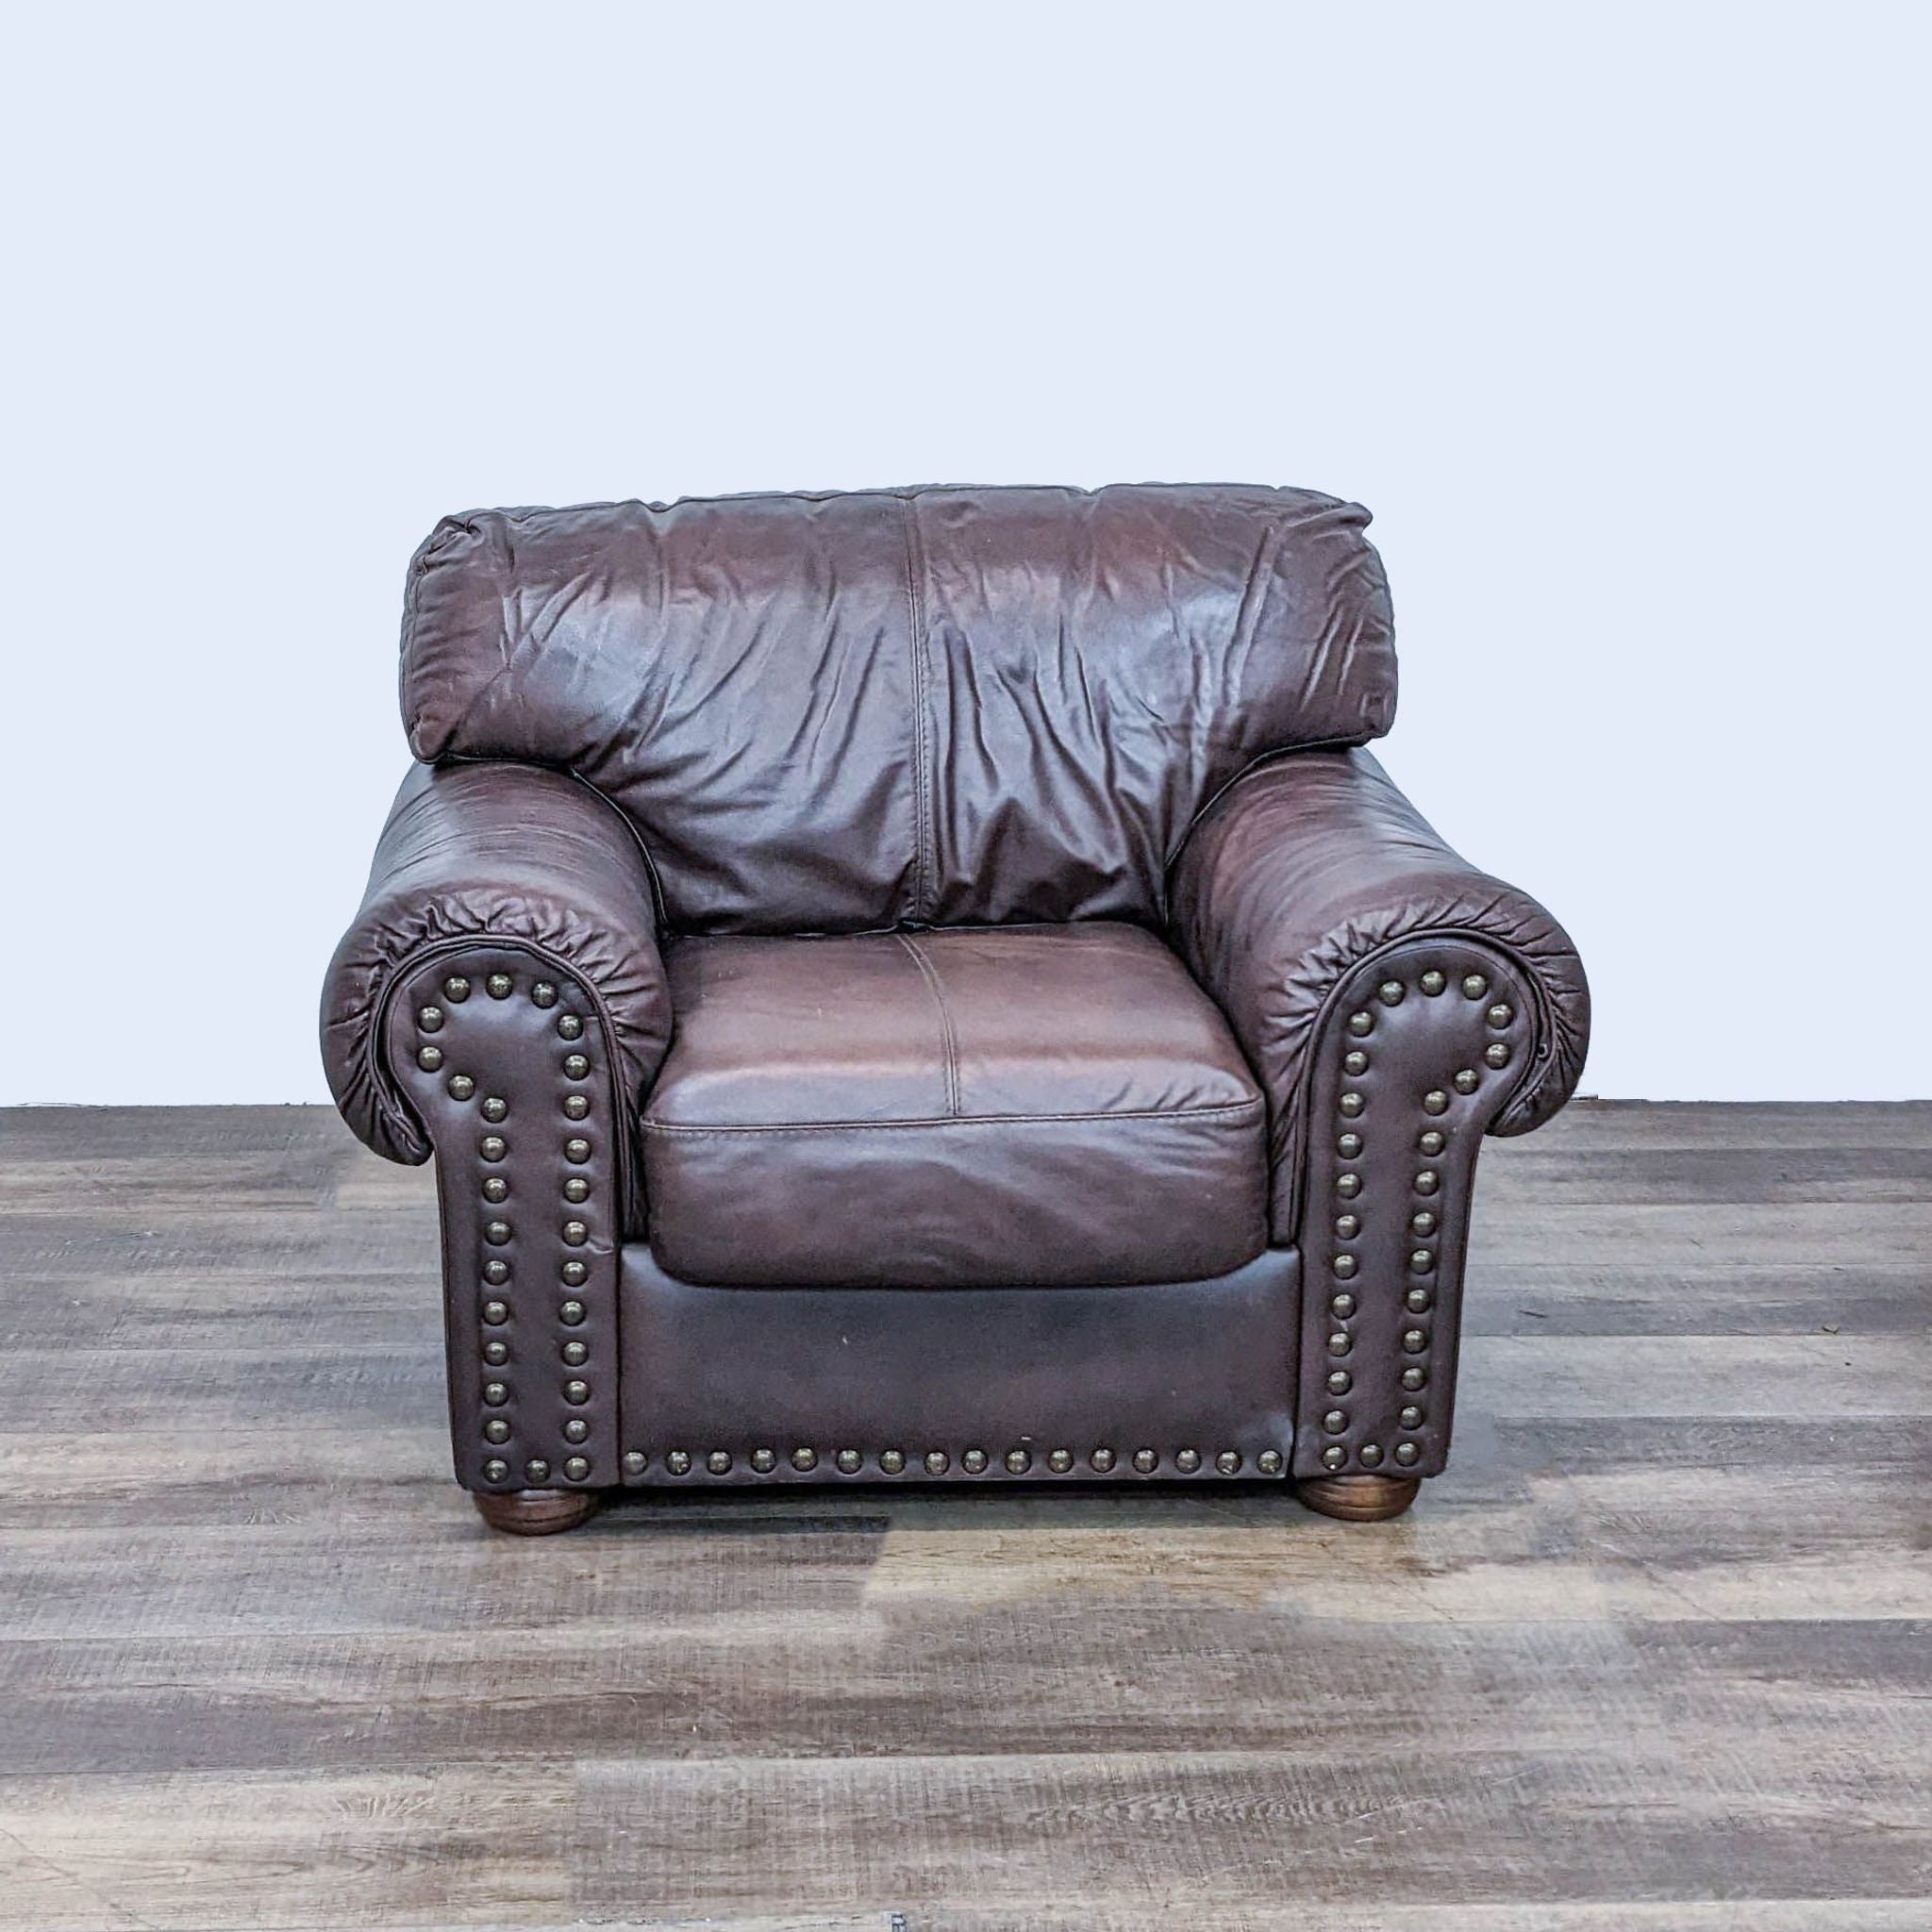 Brown leather Reperch lounge chair with matching footrest featuring nailhead accents and rolled arms against a neutral backdrop.